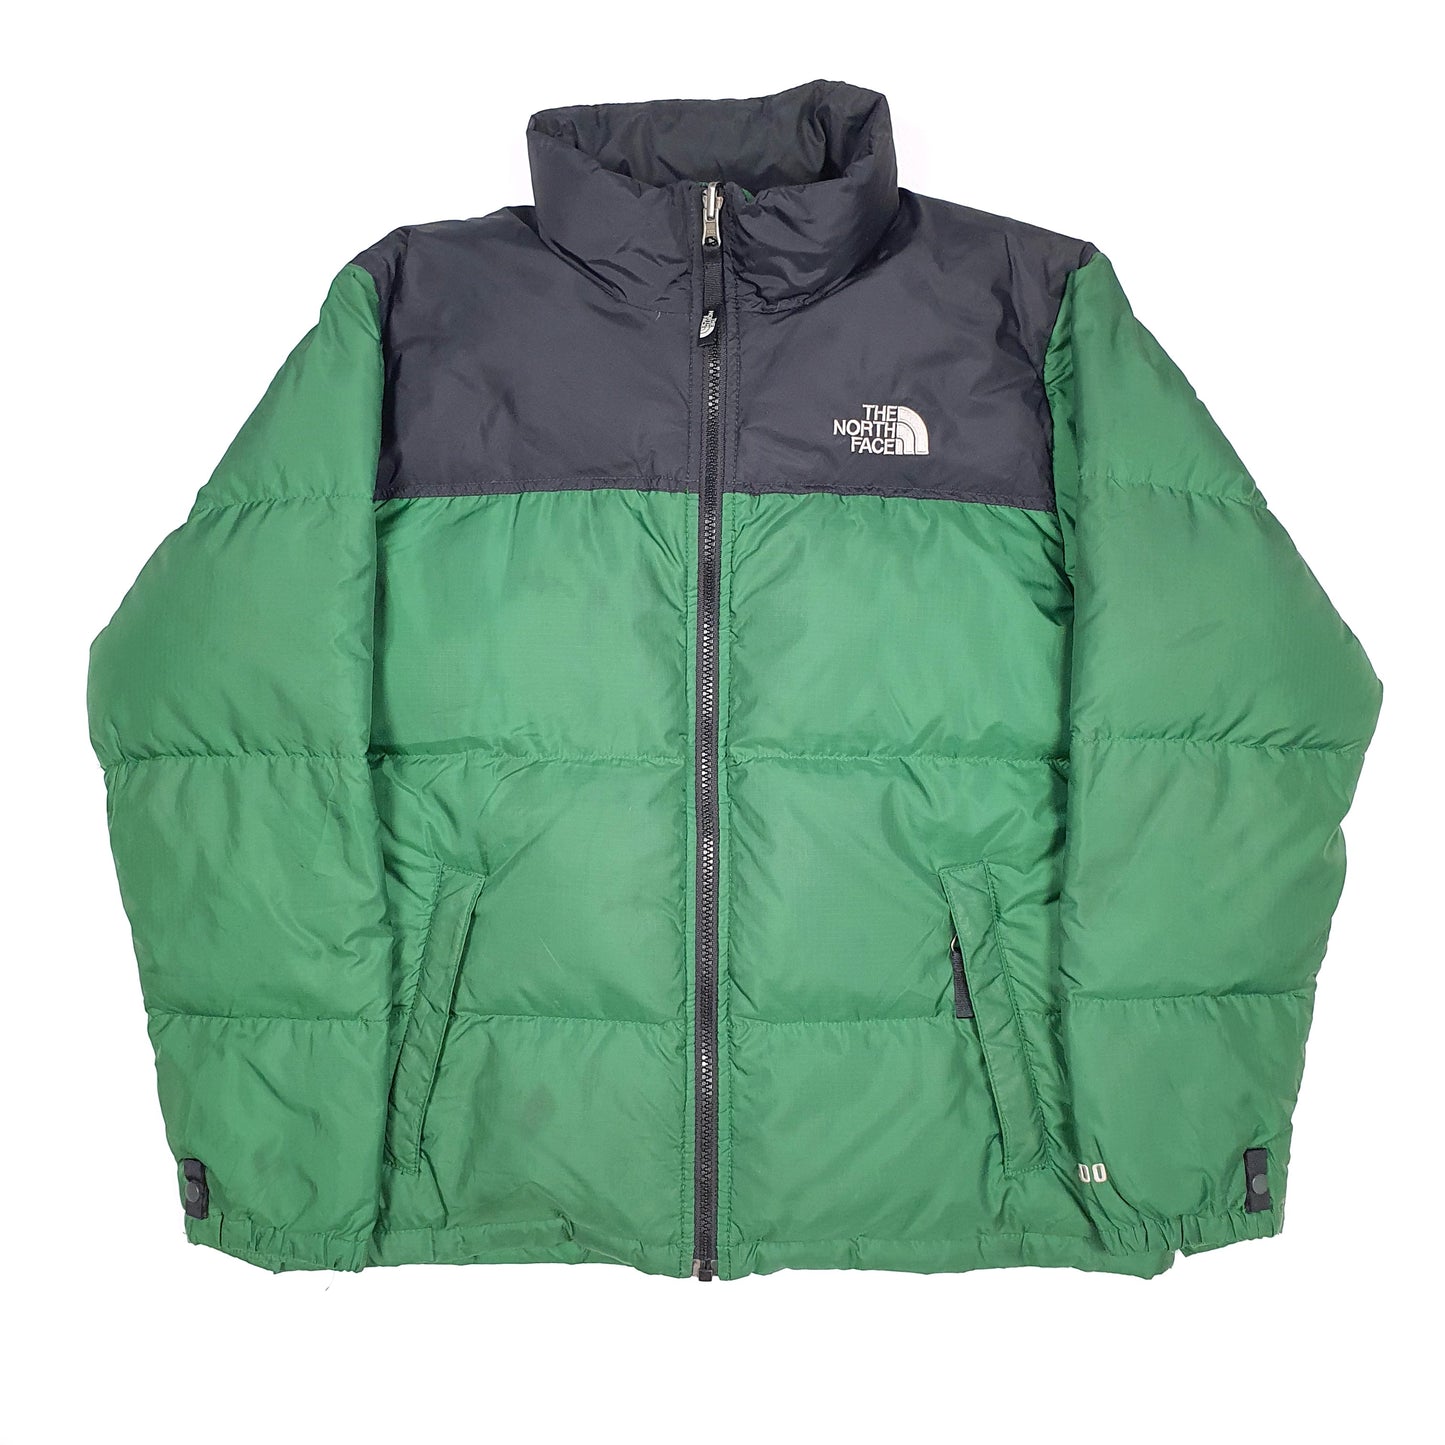 Green The North Face Puffer Jacket Coat